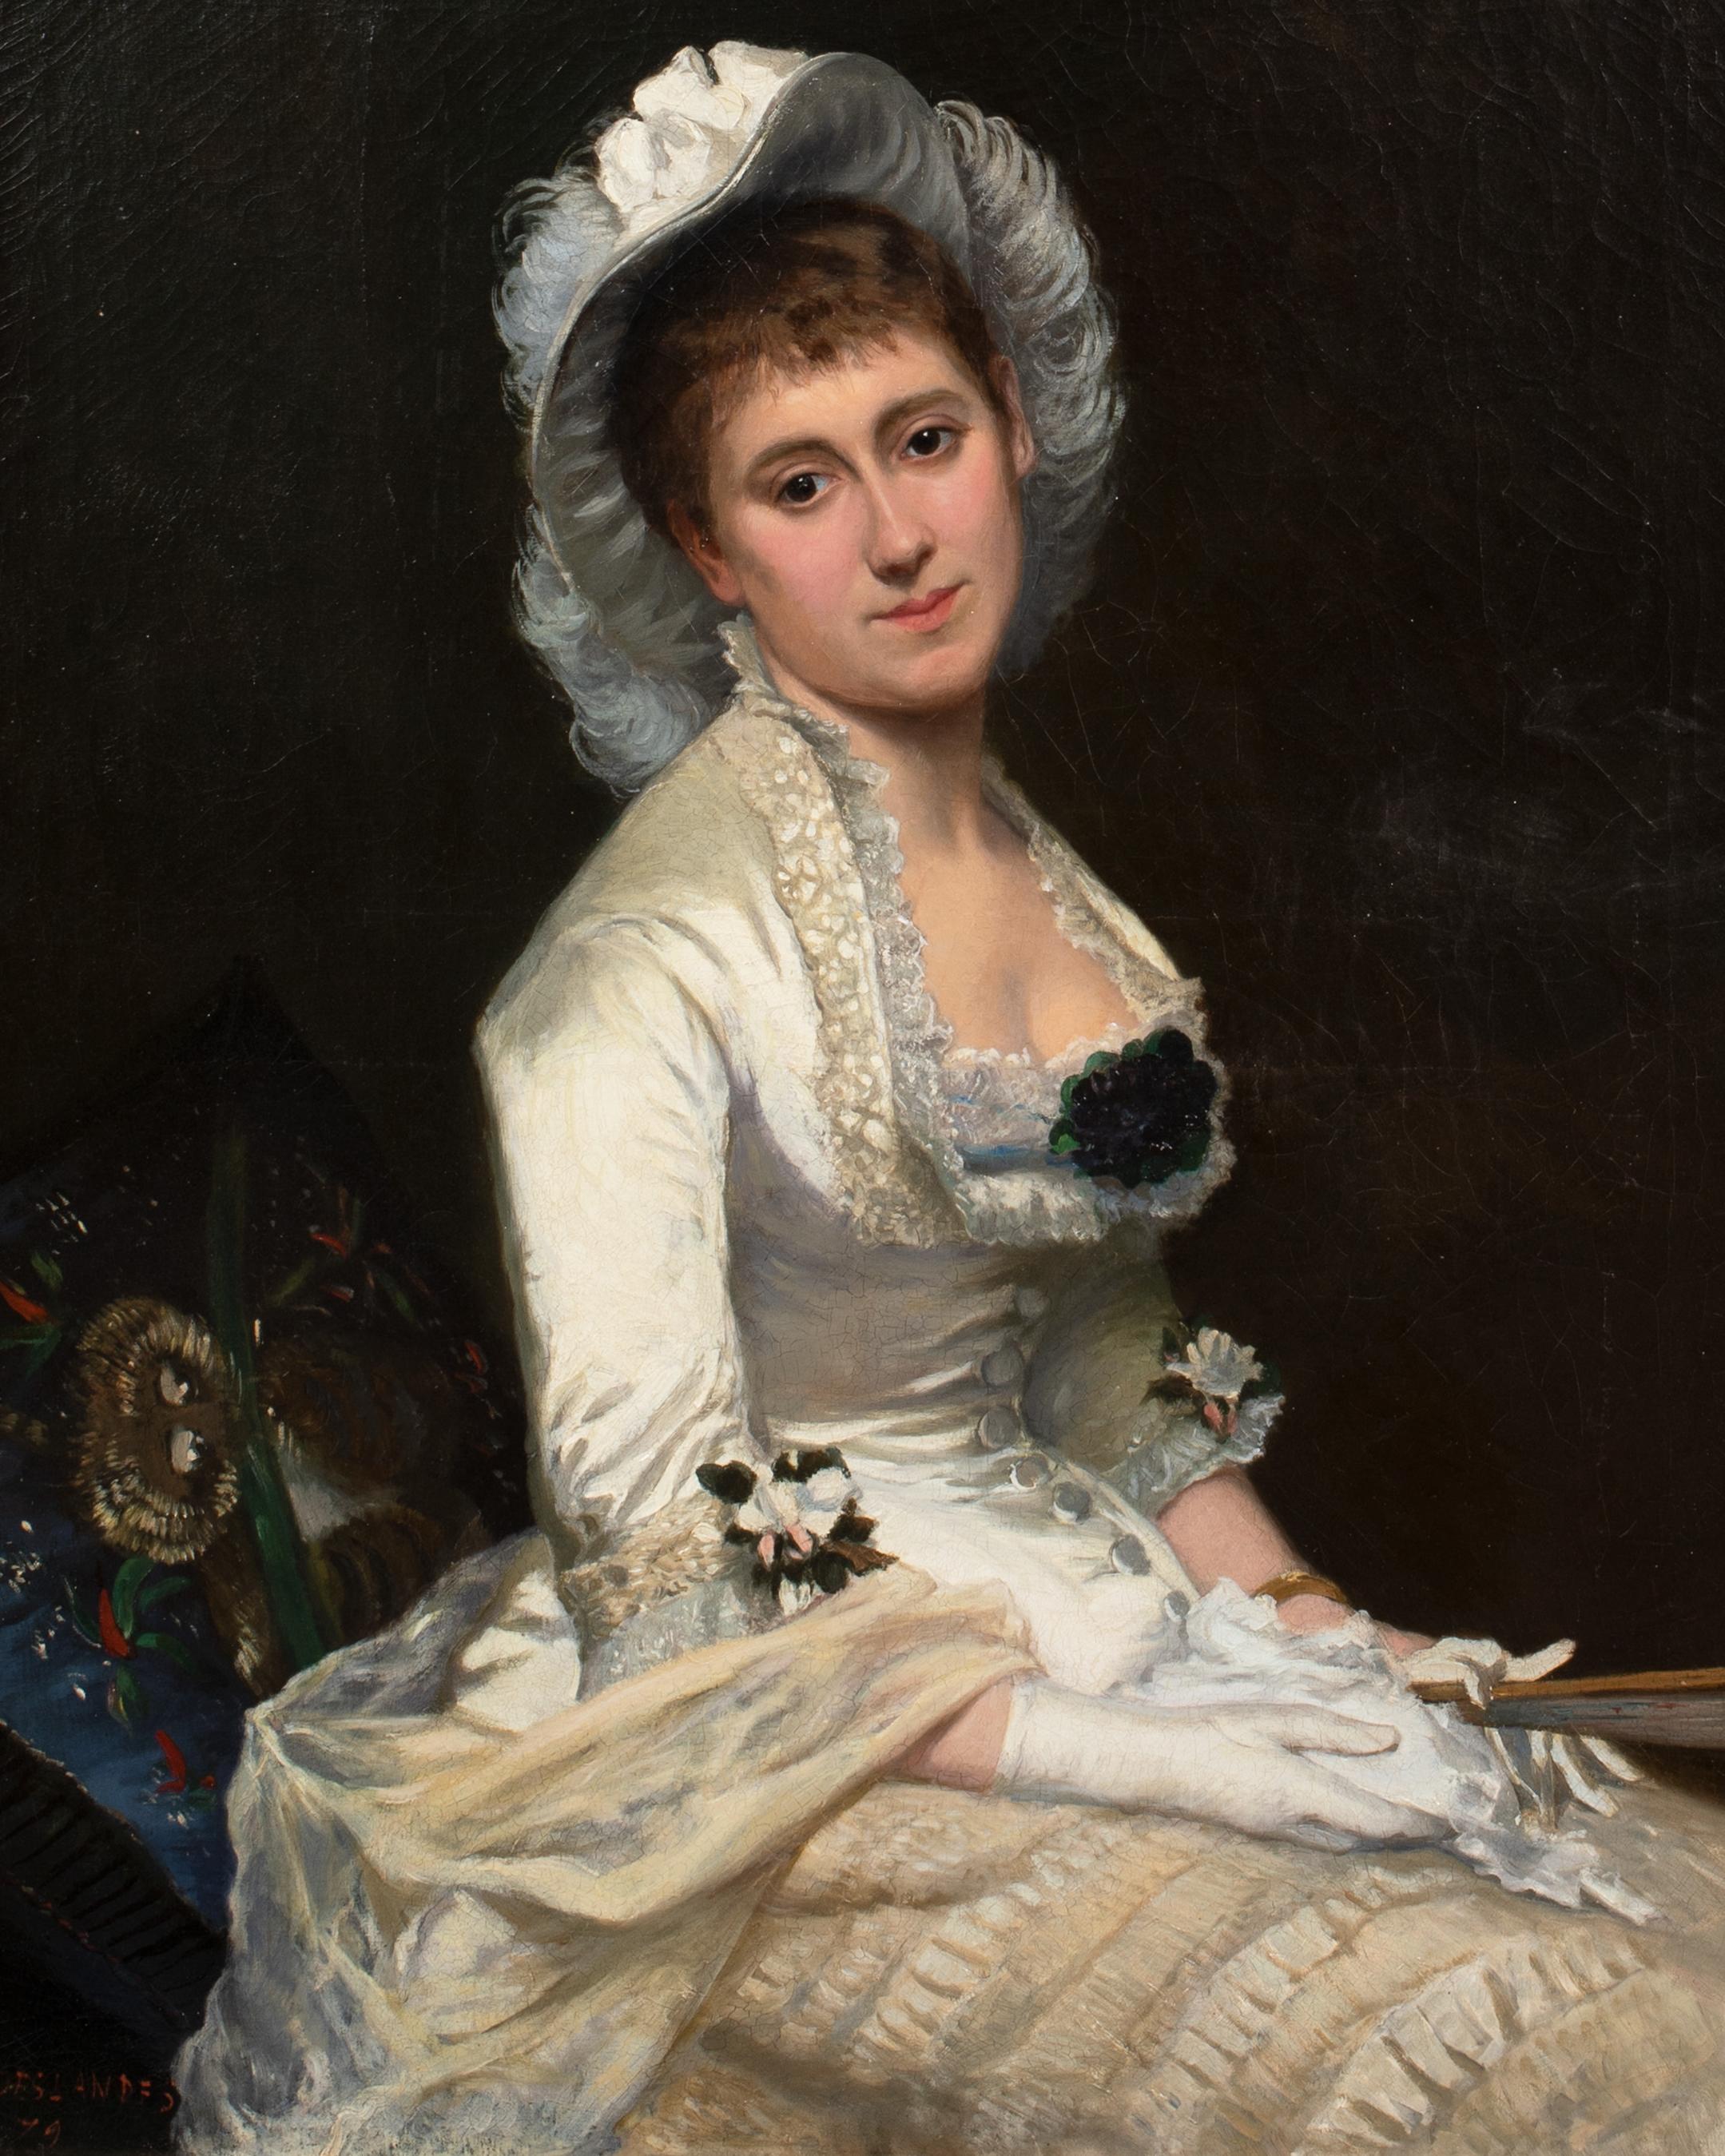 Portrait Of A Lady, circa 1880 - Black Figurative Painting by Unknown